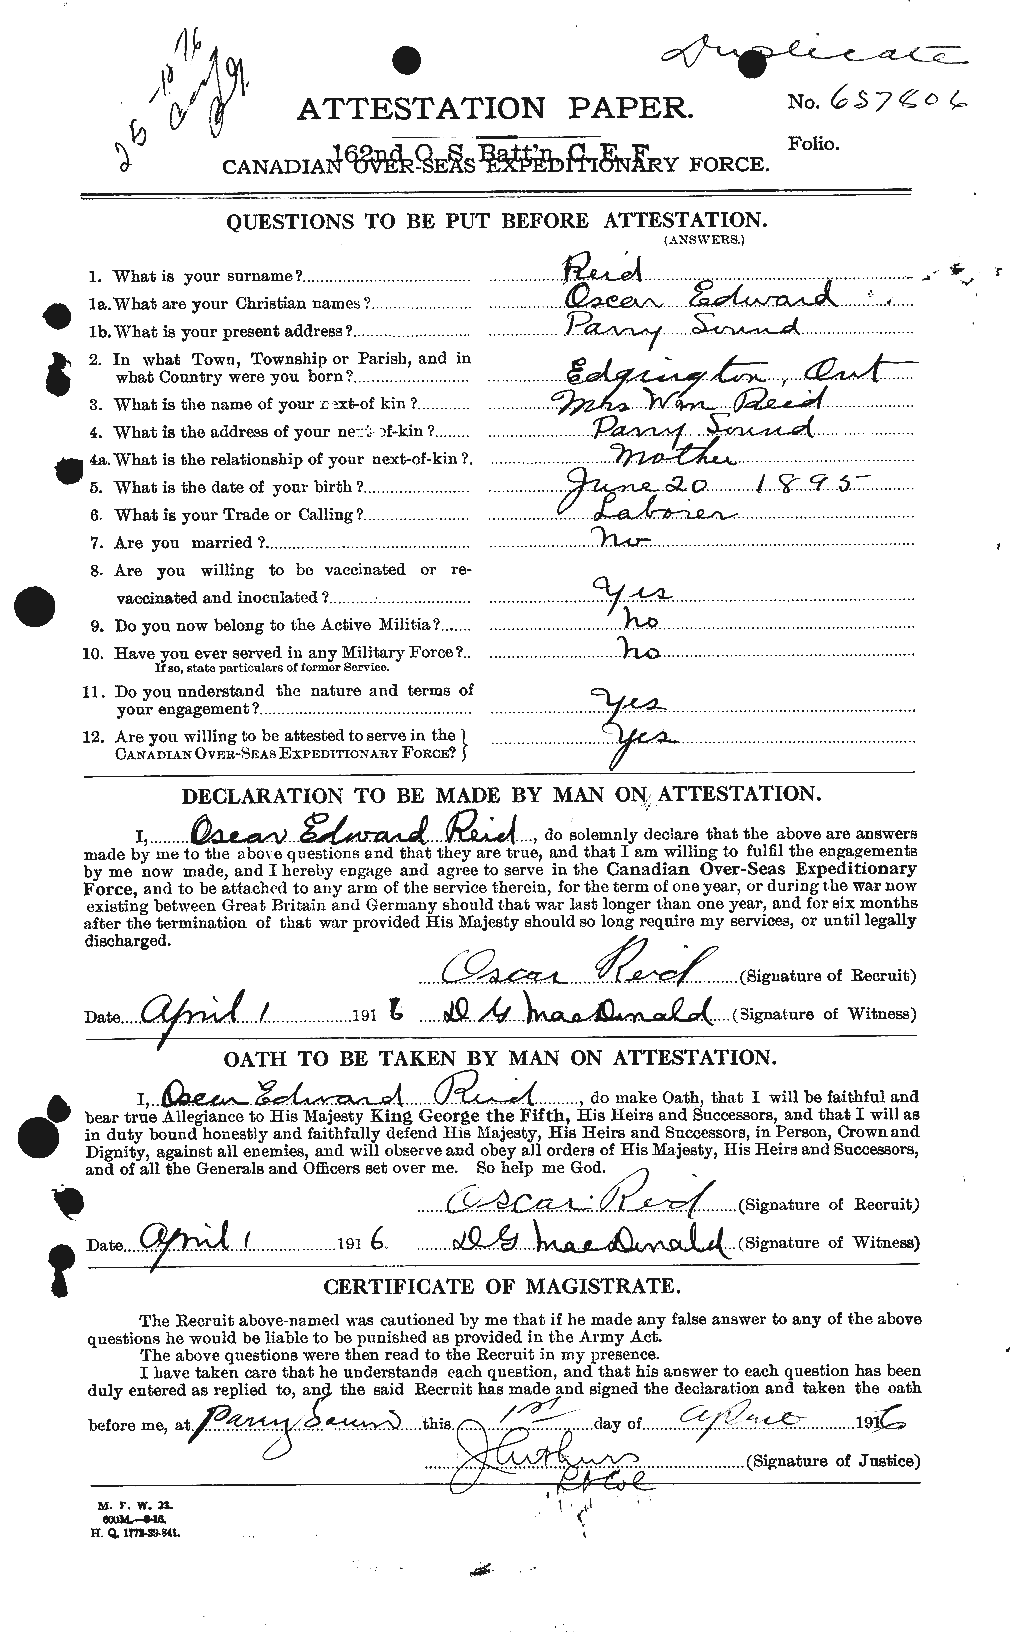 Personnel Records of the First World War - CEF 601821a